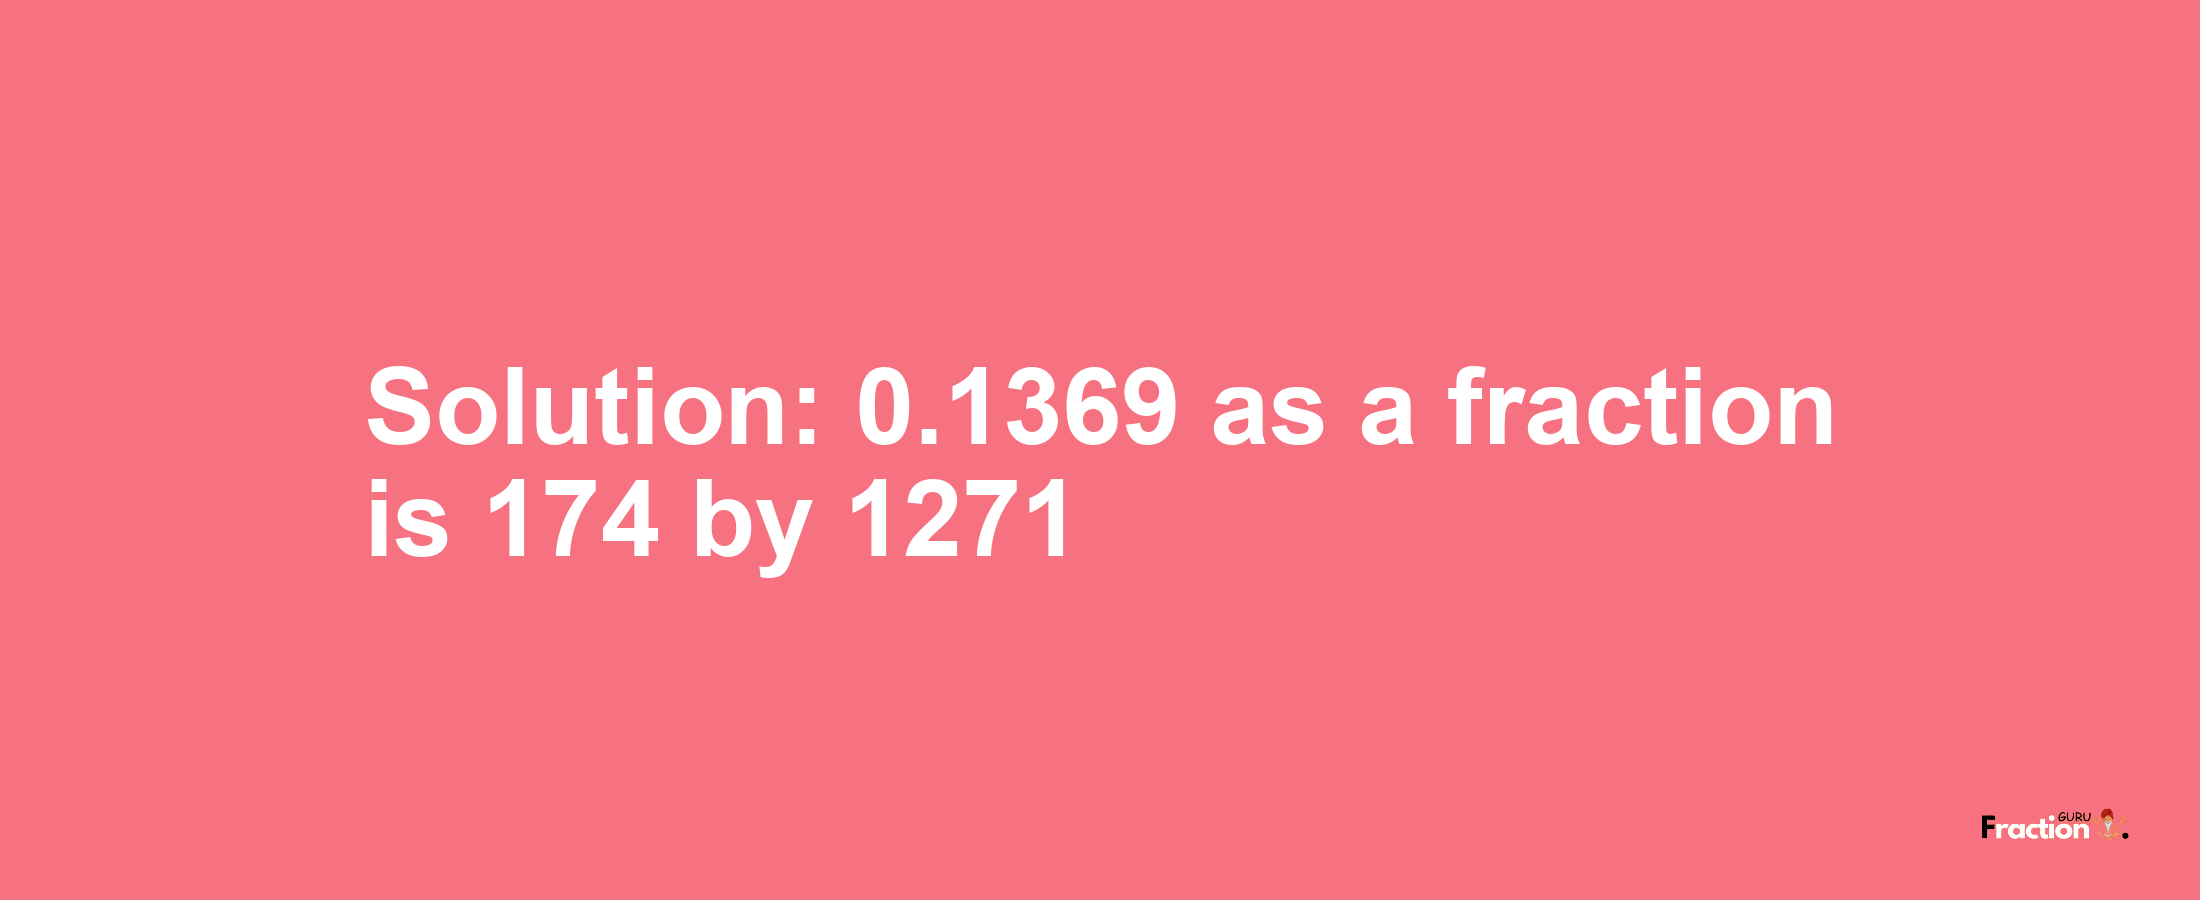 Solution:0.1369 as a fraction is 174/1271